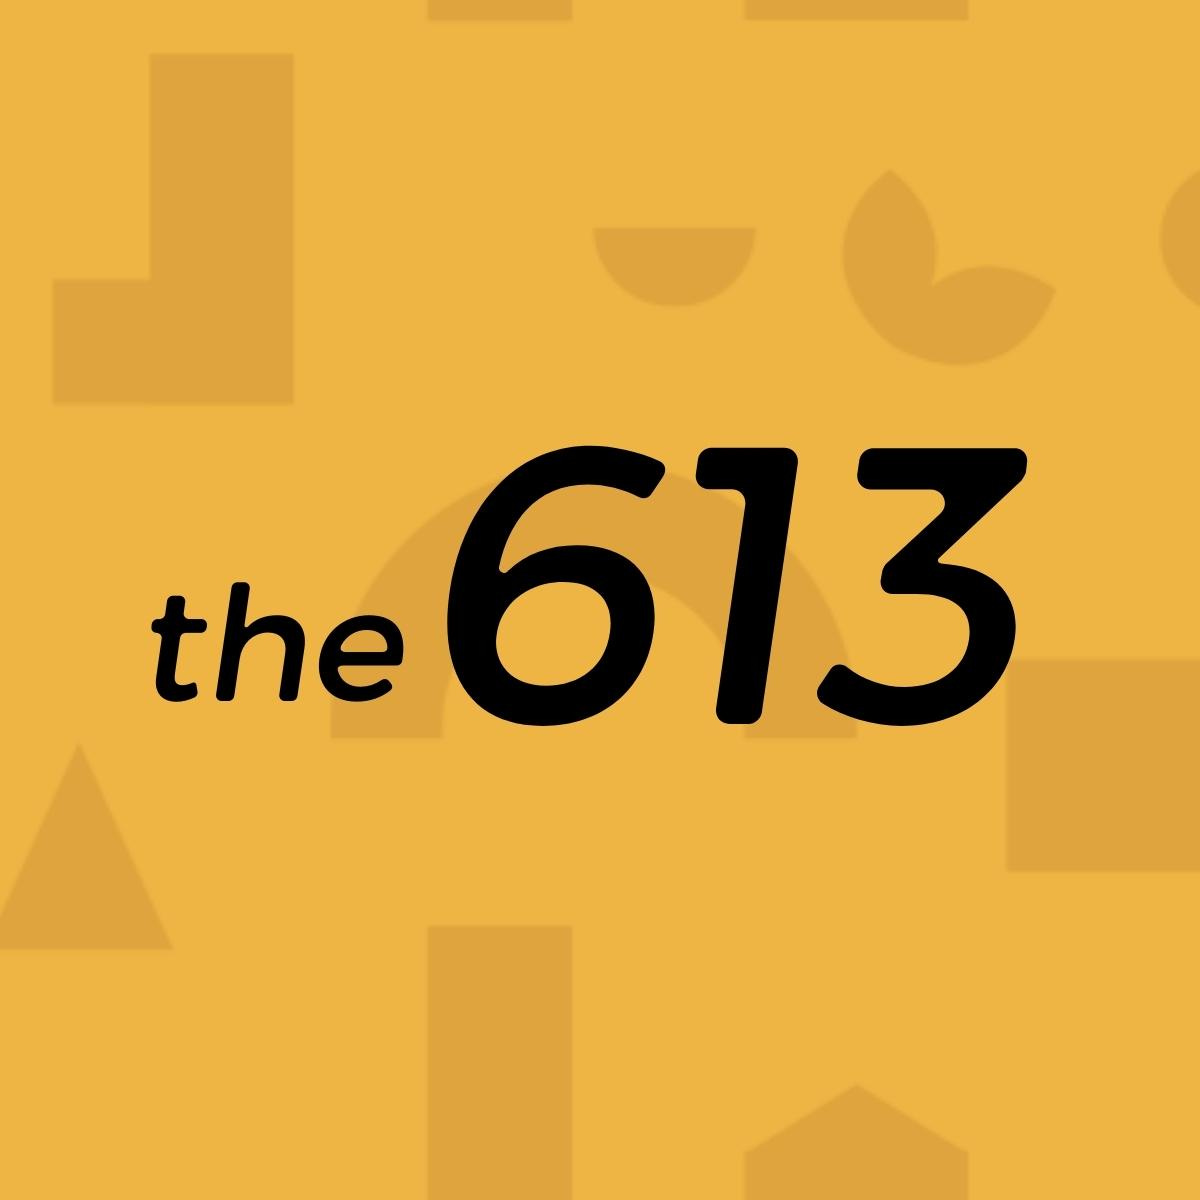 the 613